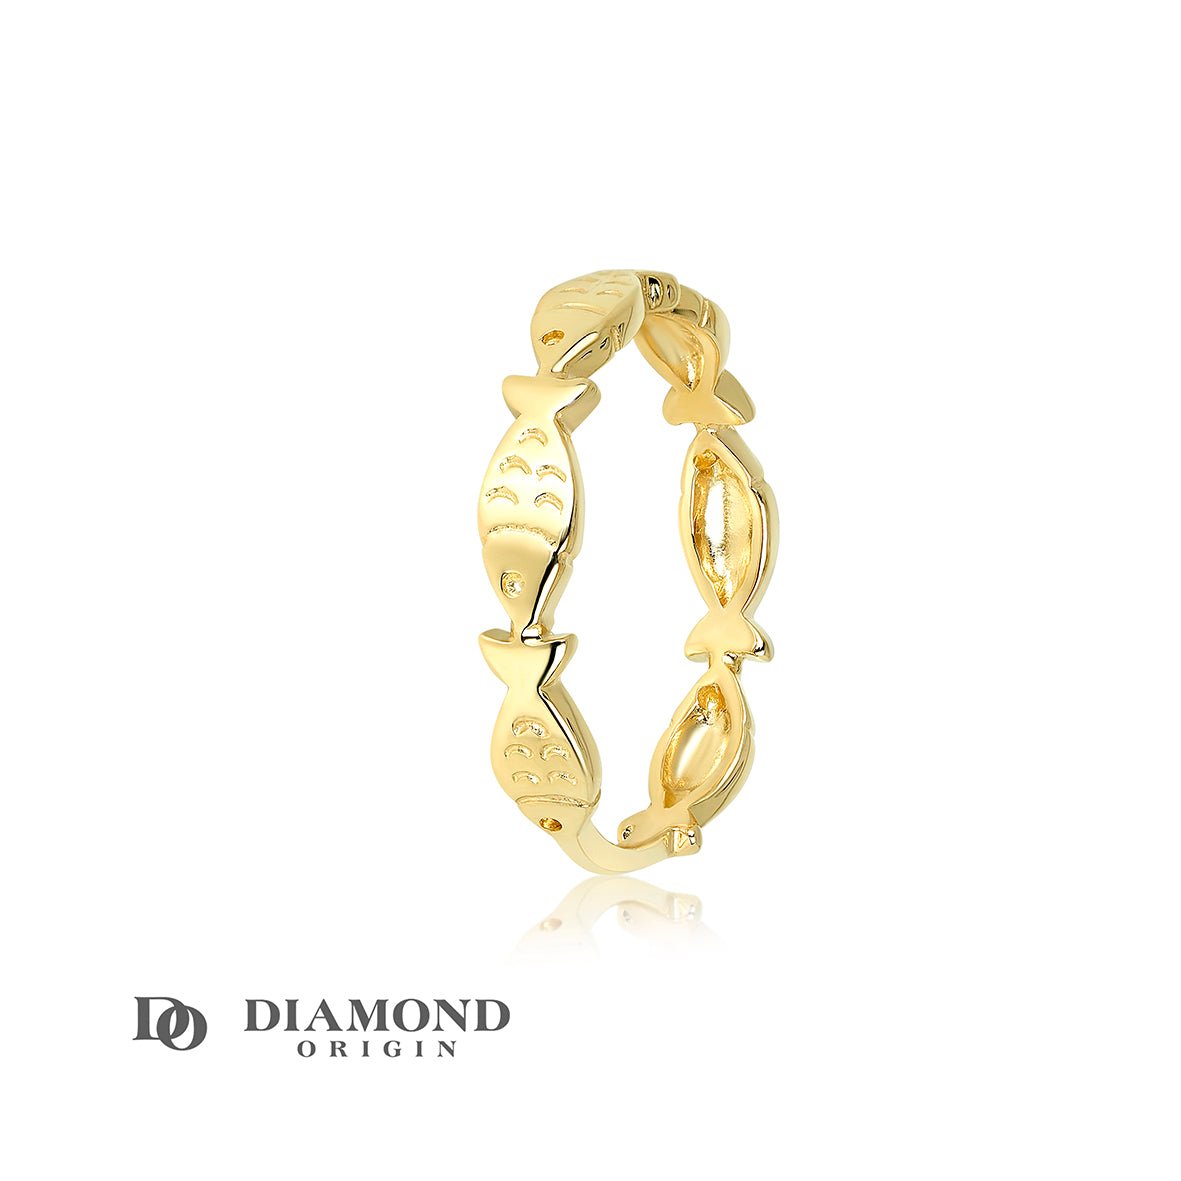 So, whether you're drawn to the symbolic nature of the fish, looking to add a little fun to your jewelry collection, or seeking a unique gift for someone special, the 14K Gold Fish Stackable Ring from Diamond Origin is a piece that promises to impress. It's a charming mix of style, whimsy, and quality craftsmanship - a little treasure that's sure to bring joy.